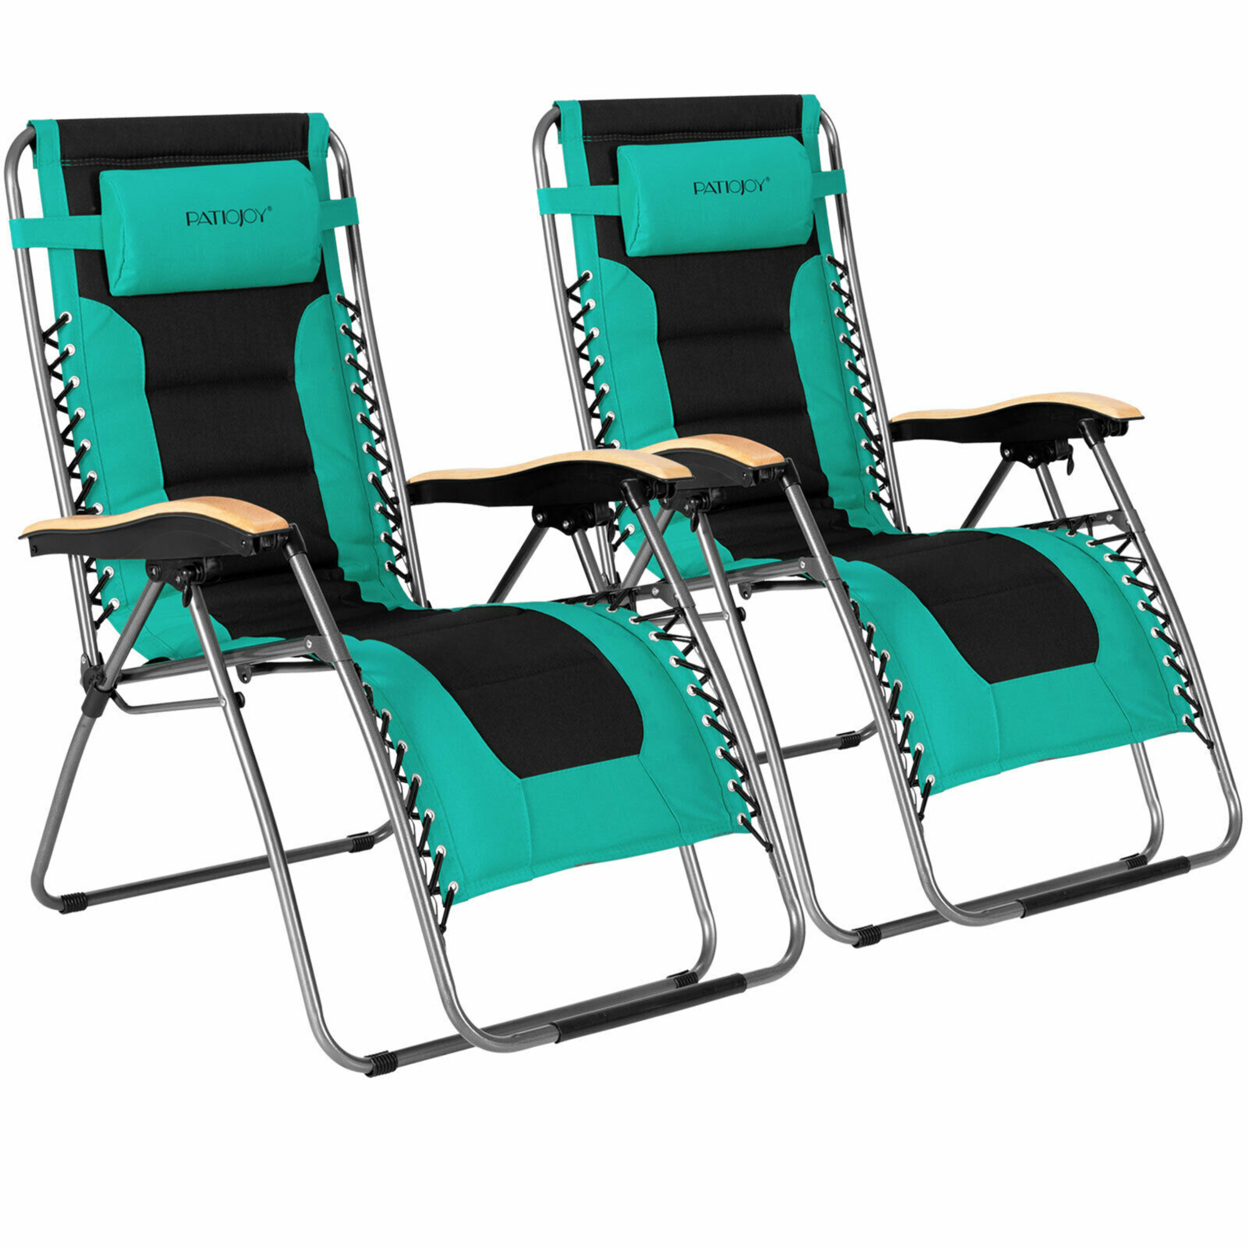 2PCS Folding Zero Gravity Chair Padded Lounge Chair W/ Beech Armrests - Turquoise